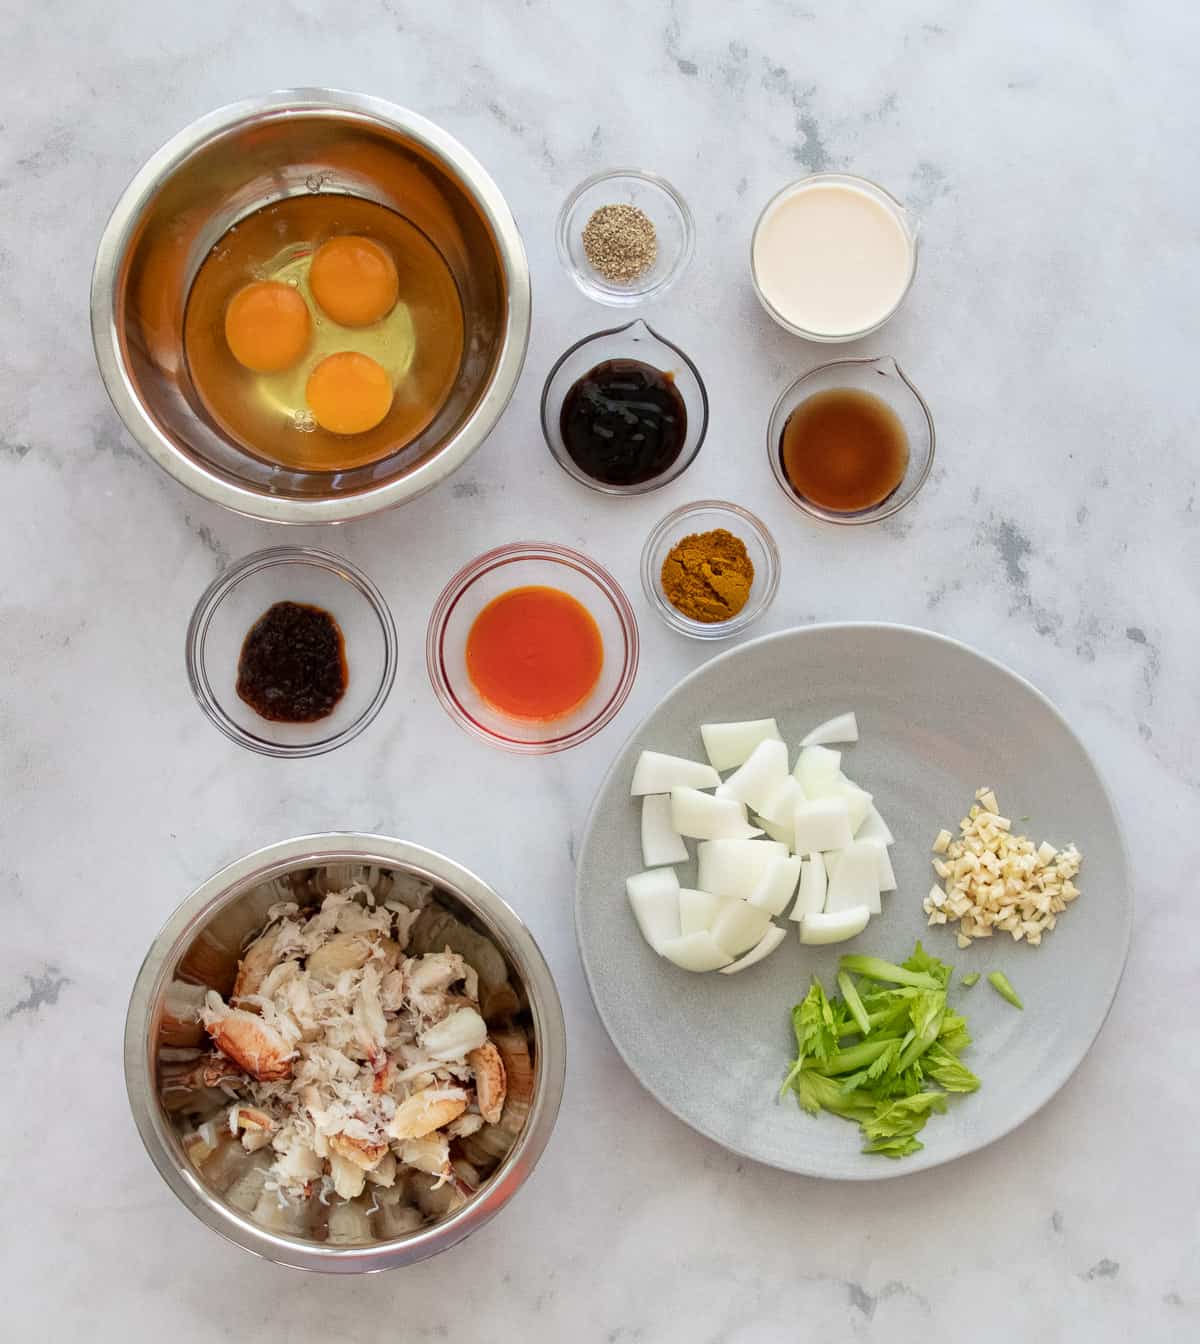 Ingredients for curry crab stir fry